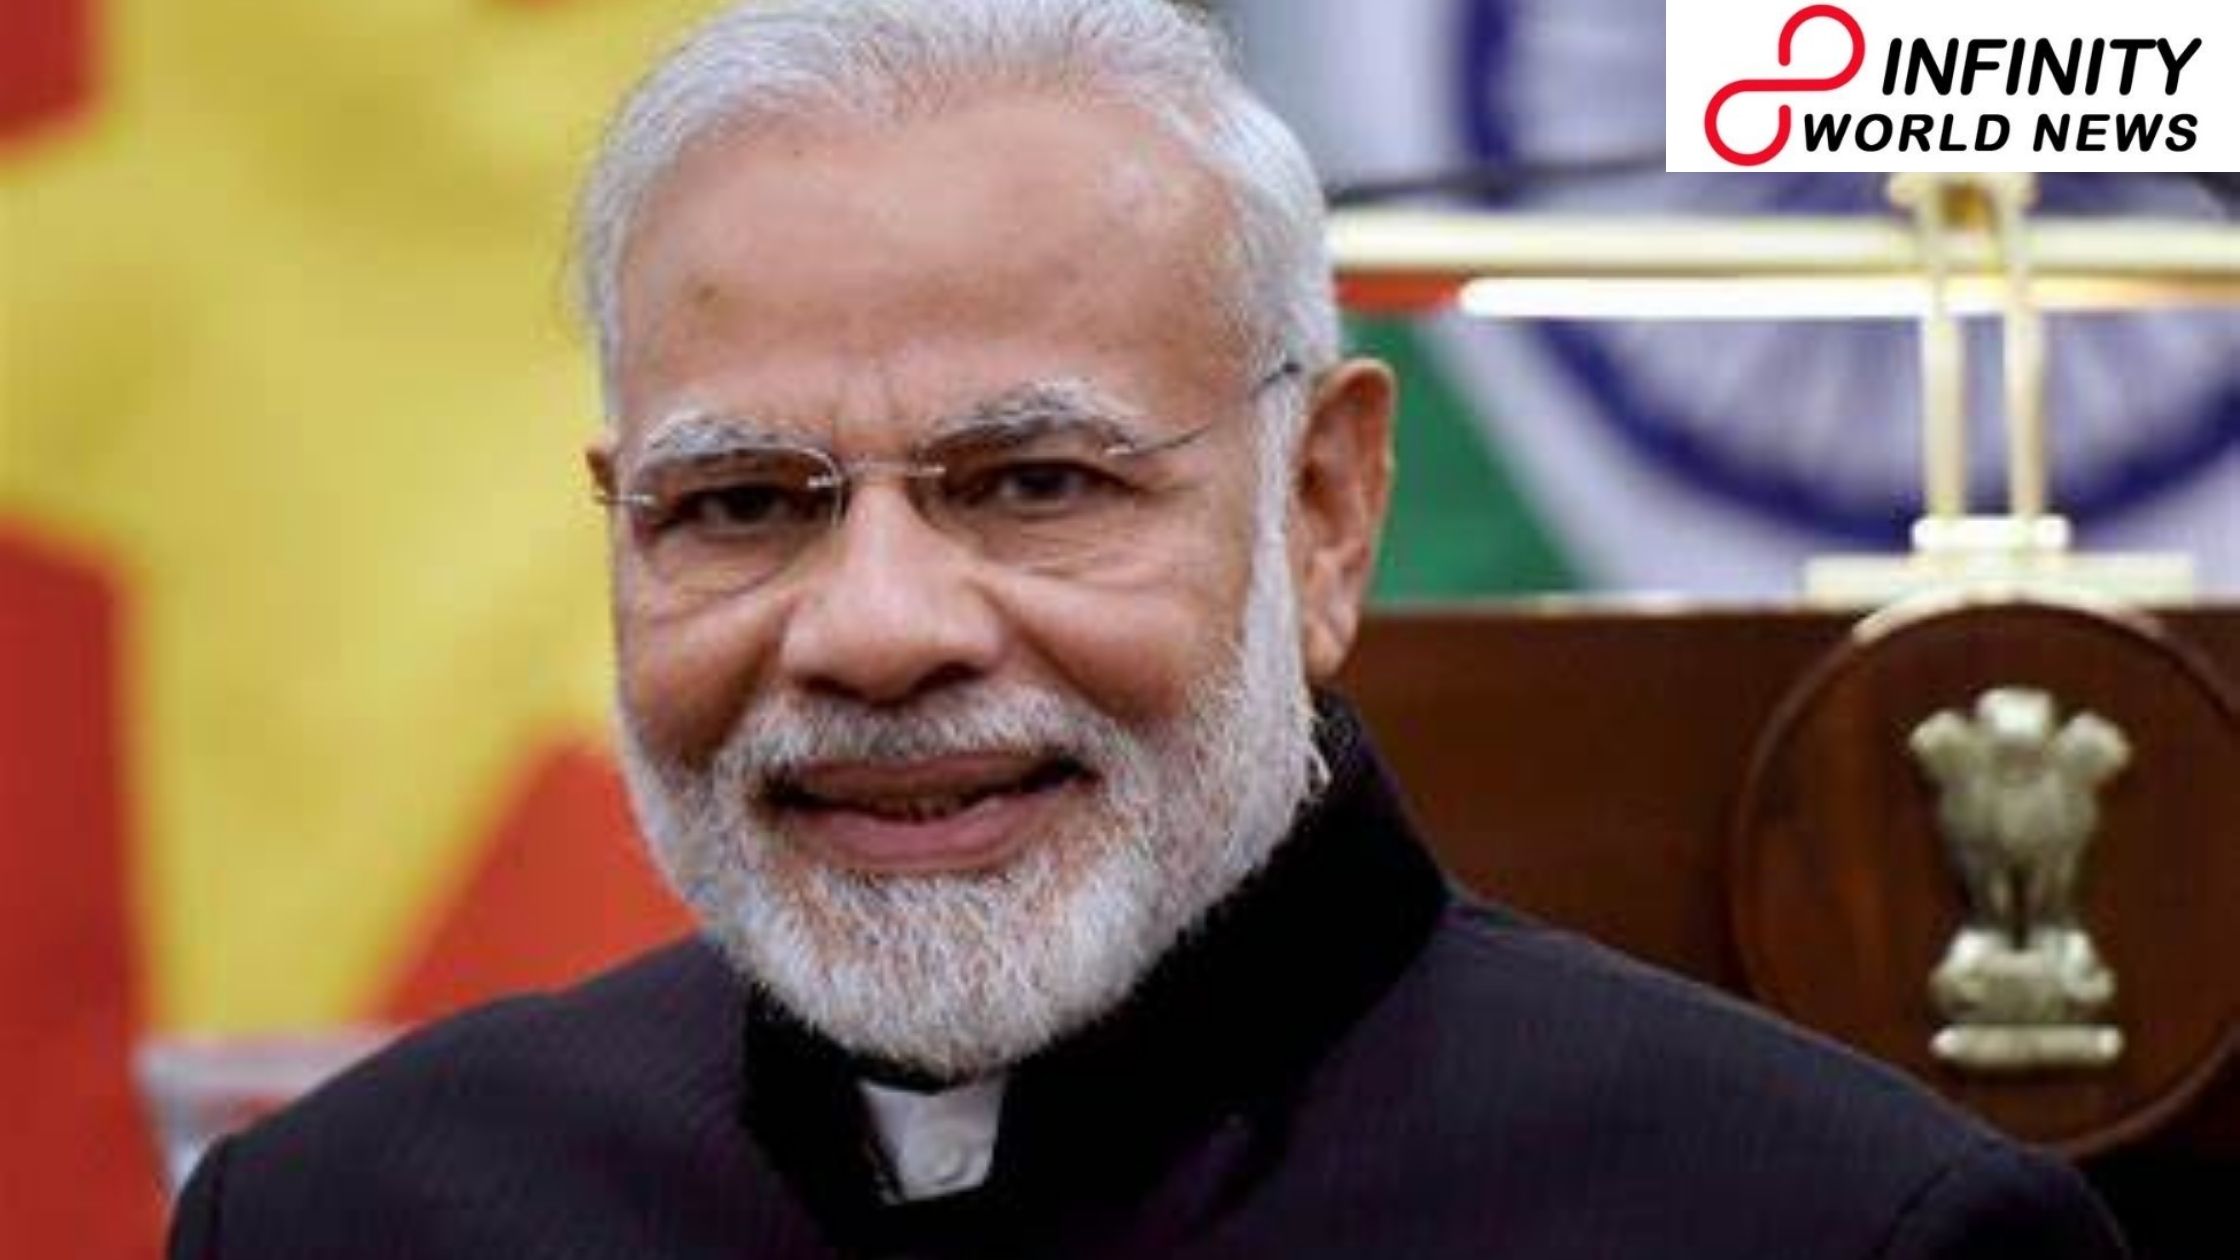 PM Narendra Modi greets country's judiciary for safeguarding people's privileges